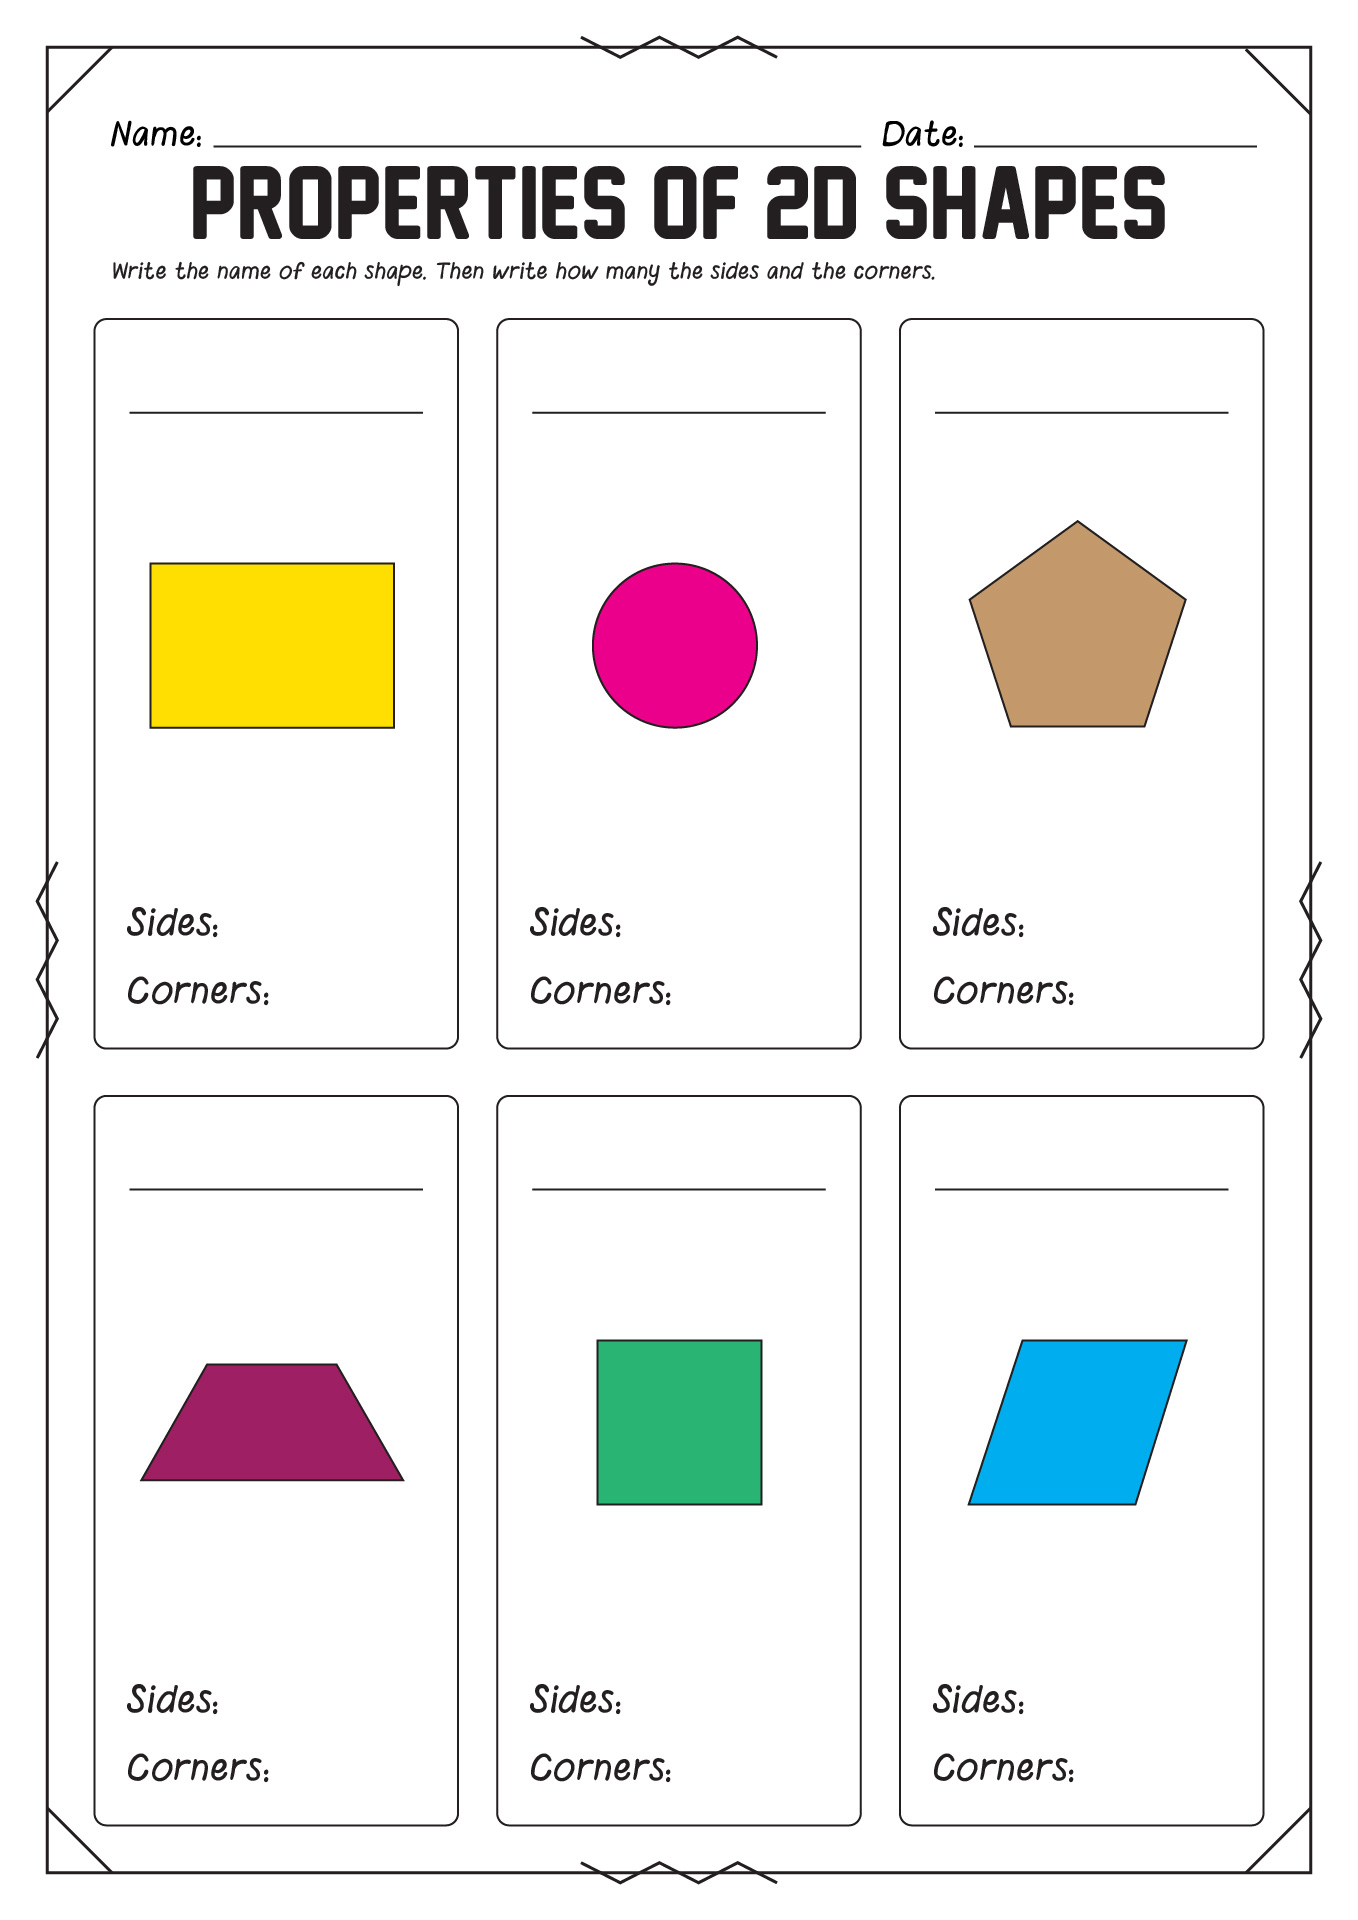 Properties of 2D Shapes and Their Names